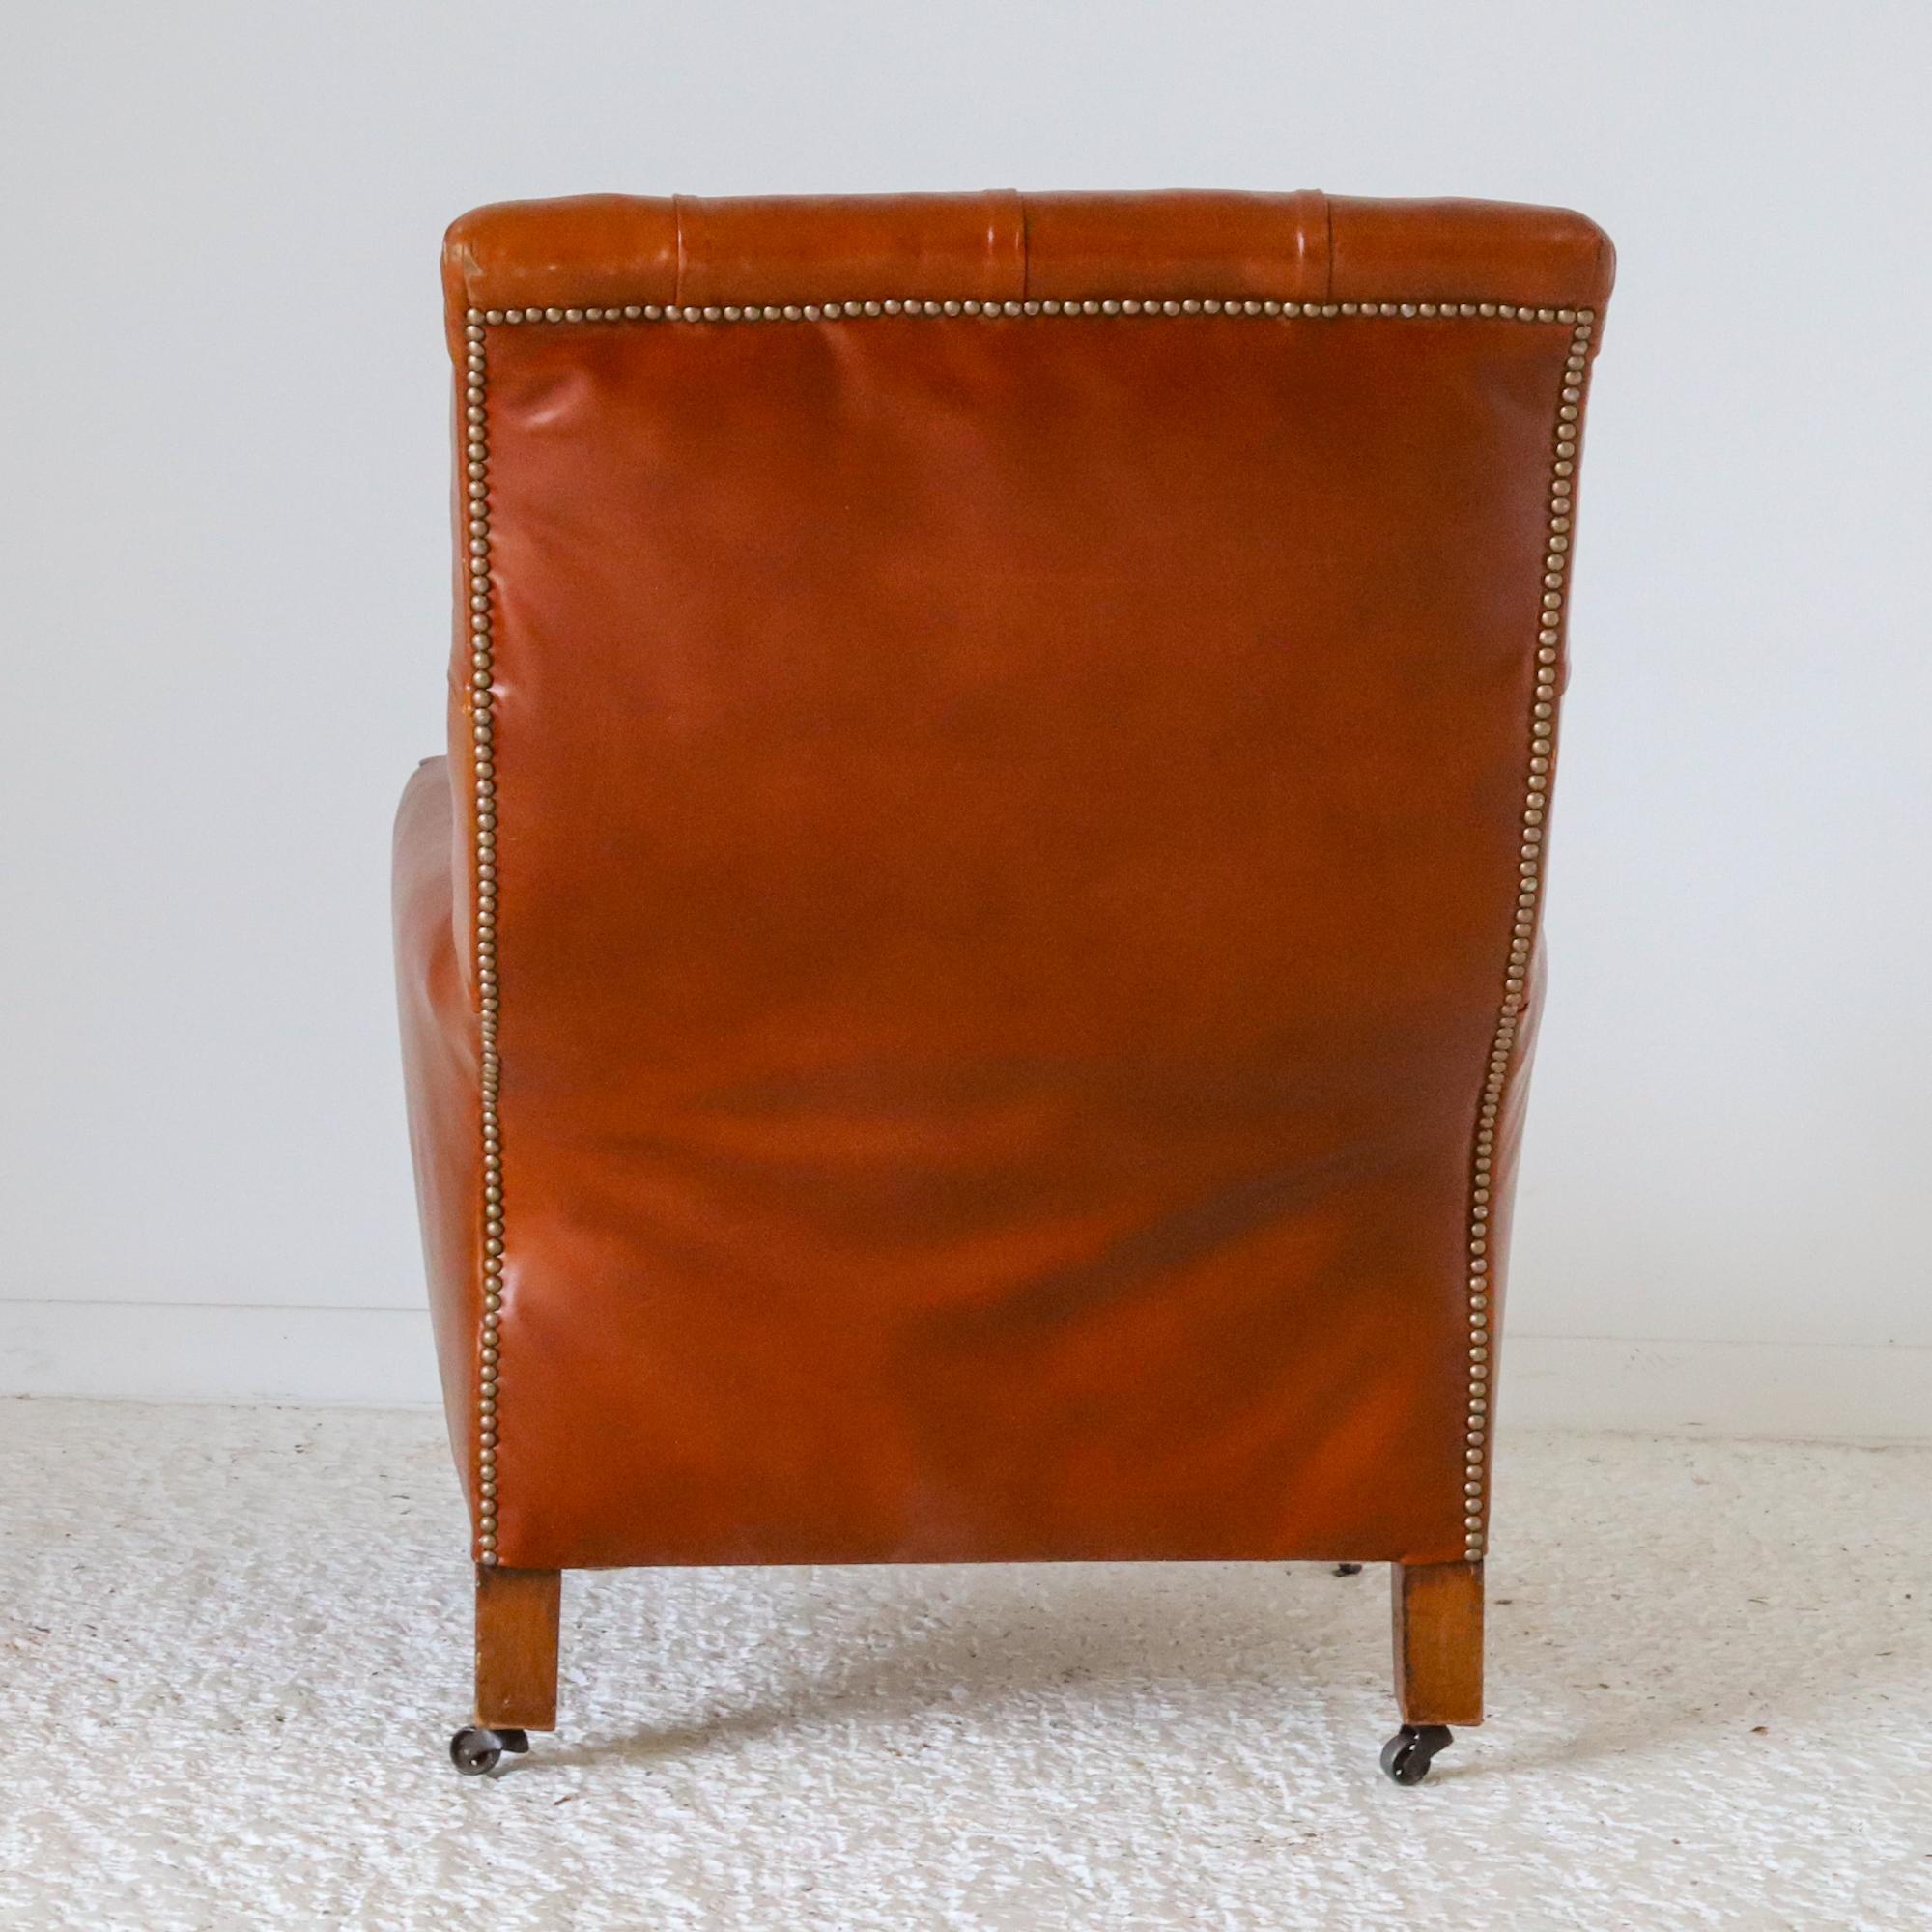 English c. 1830 Mahogany William IV Library Chair reupholstered in tan leather  For Sale 6